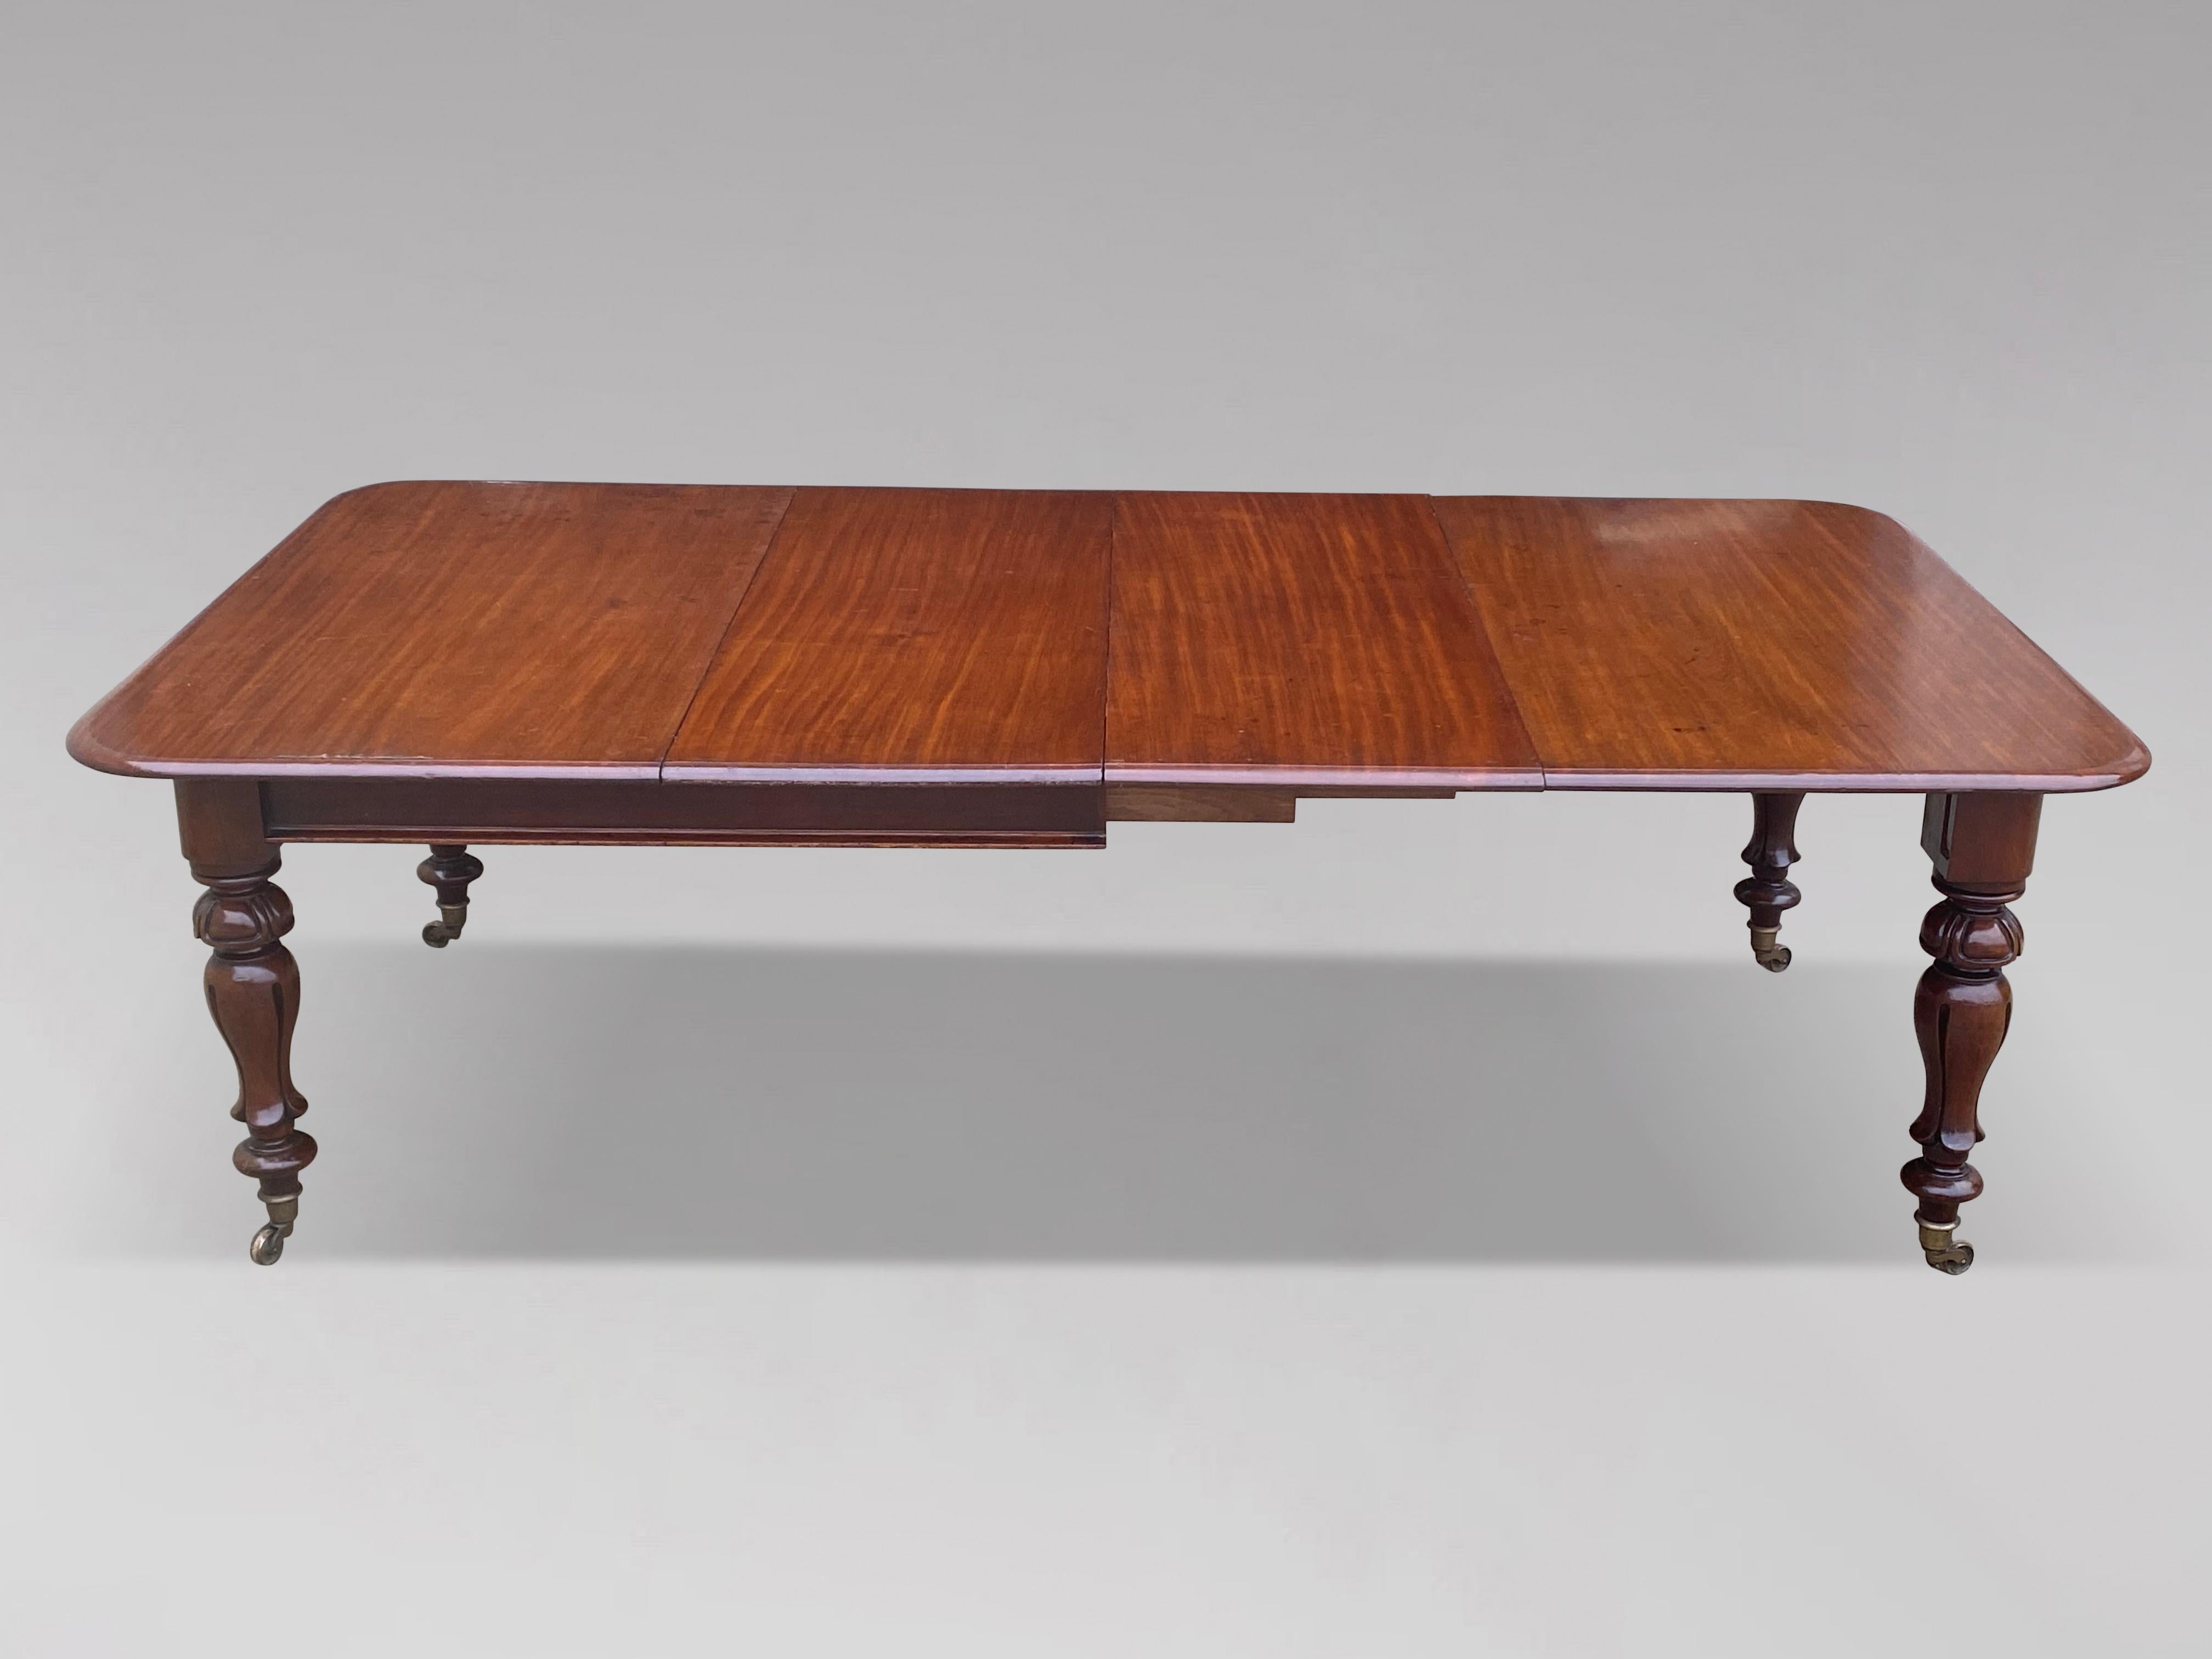 A great quality early 19th century, William IV period, mahogany pull-out extending dining table, the rounded rectangular moulded top over plain frieze raised on shaped turned legs ending on brass castors including two original leaves. Superb